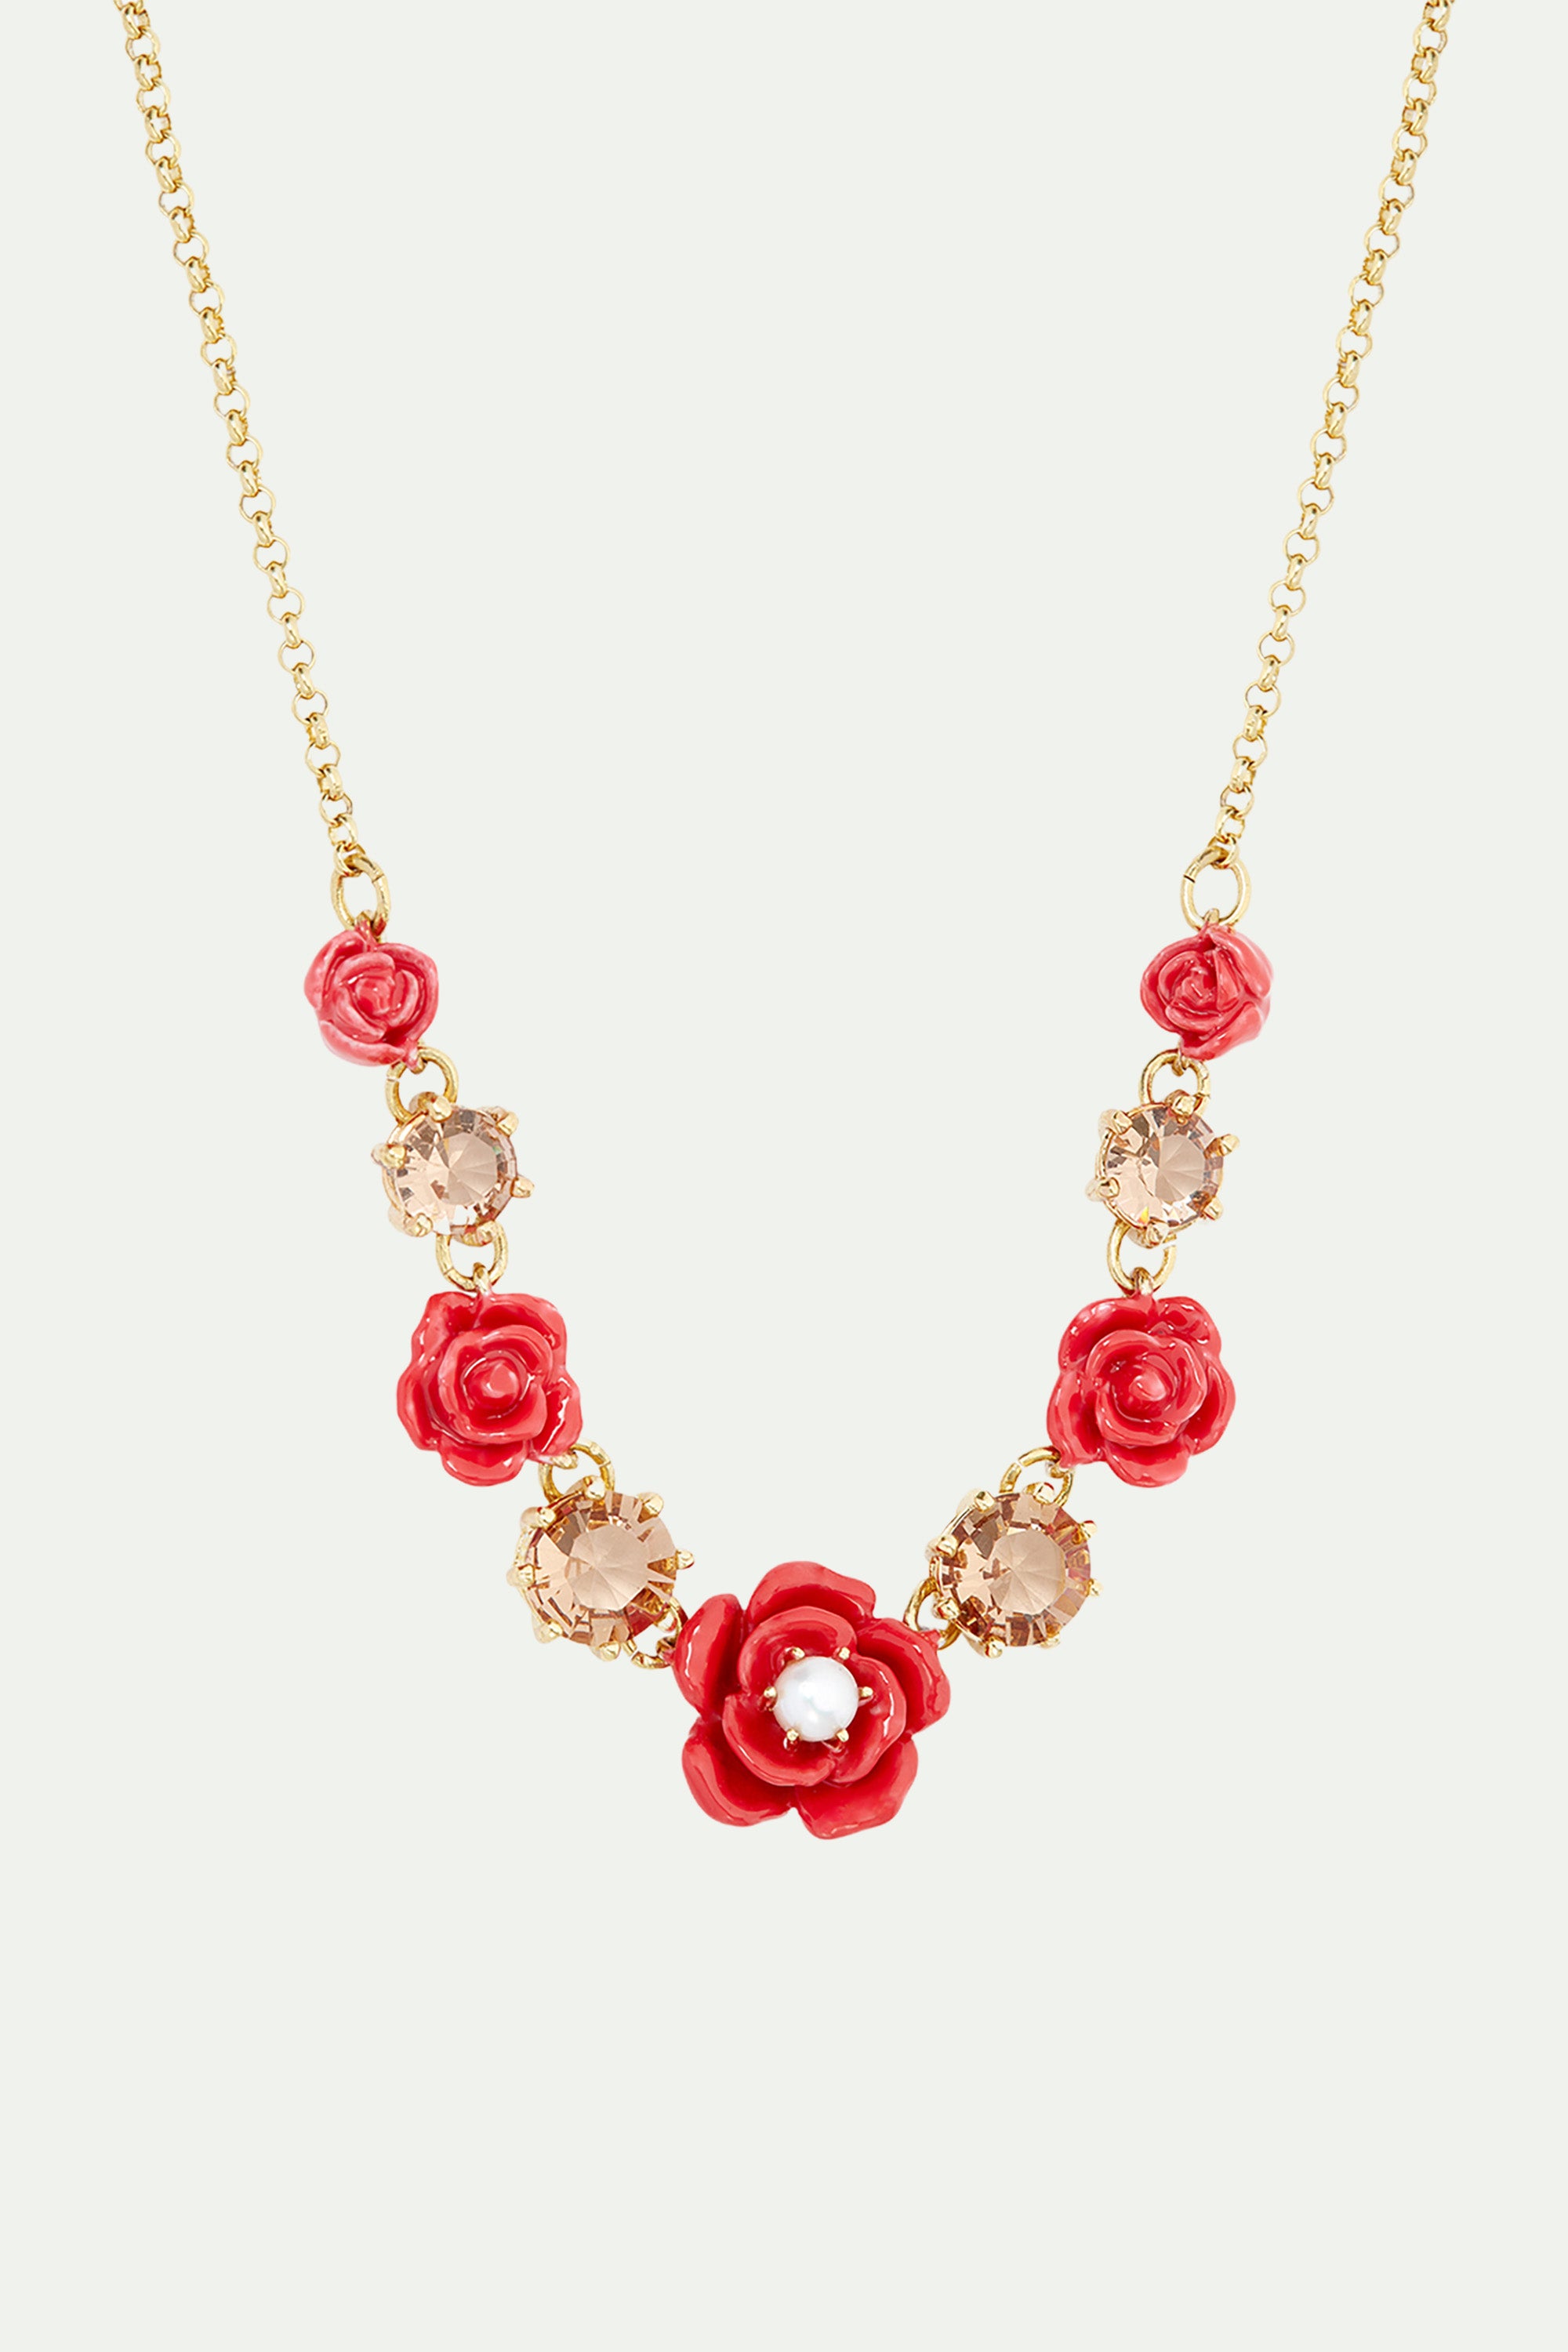 Roses, cultured pearl and stone statement necklace